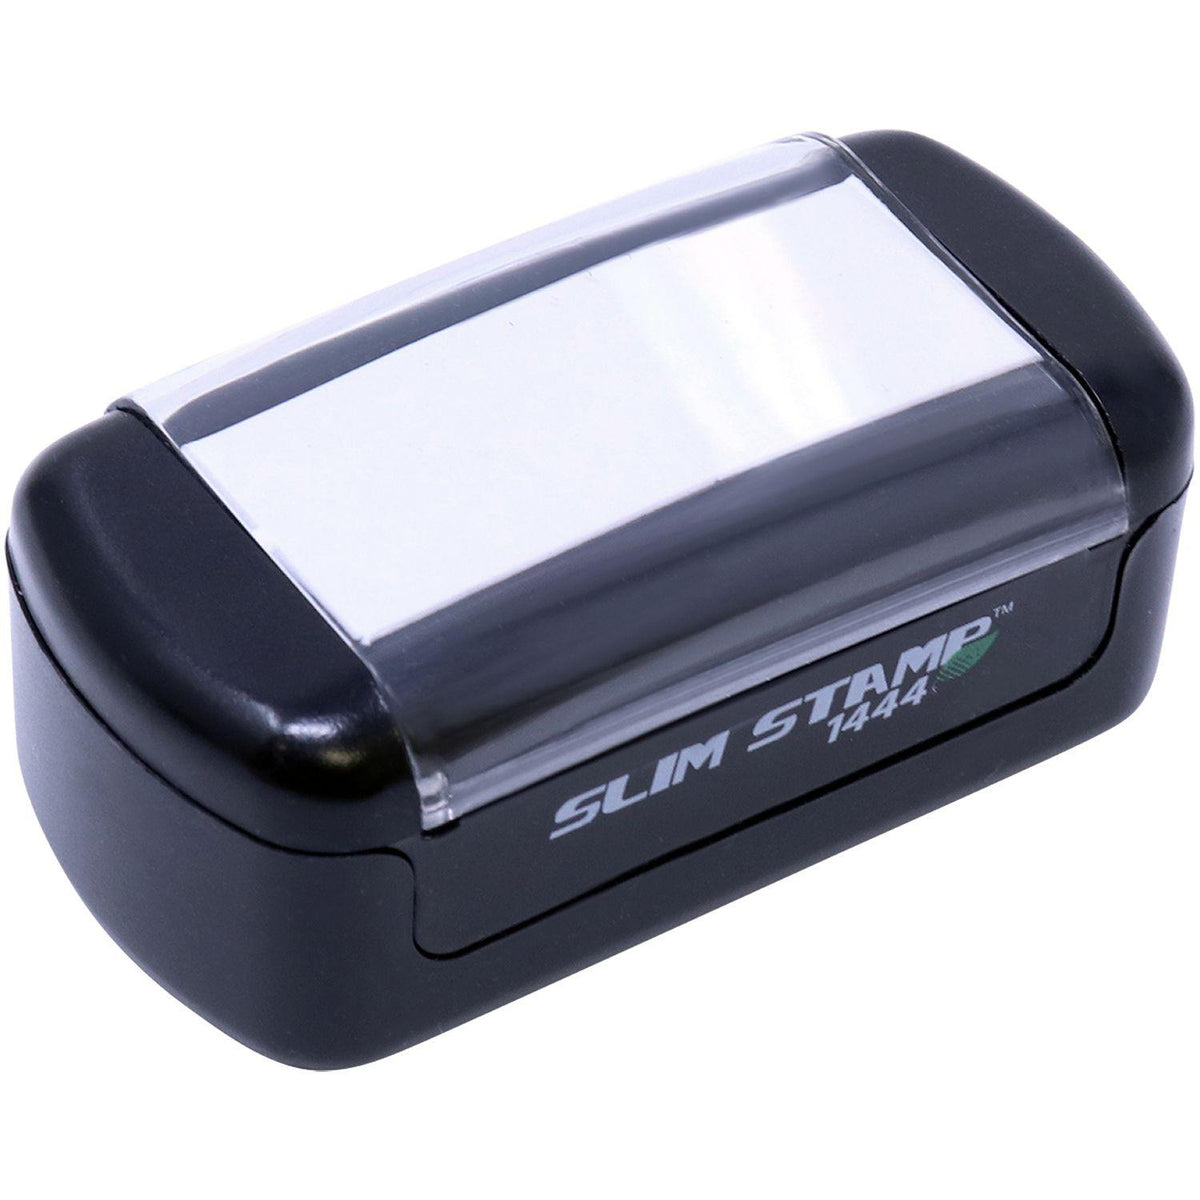 Slim Pre Inked Atm Stamp - Engineer Seal Stamps - Brand_Slim, Impression Size_Small, Stamp Type_Pre-Inked Stamp, Type of Use_Finance